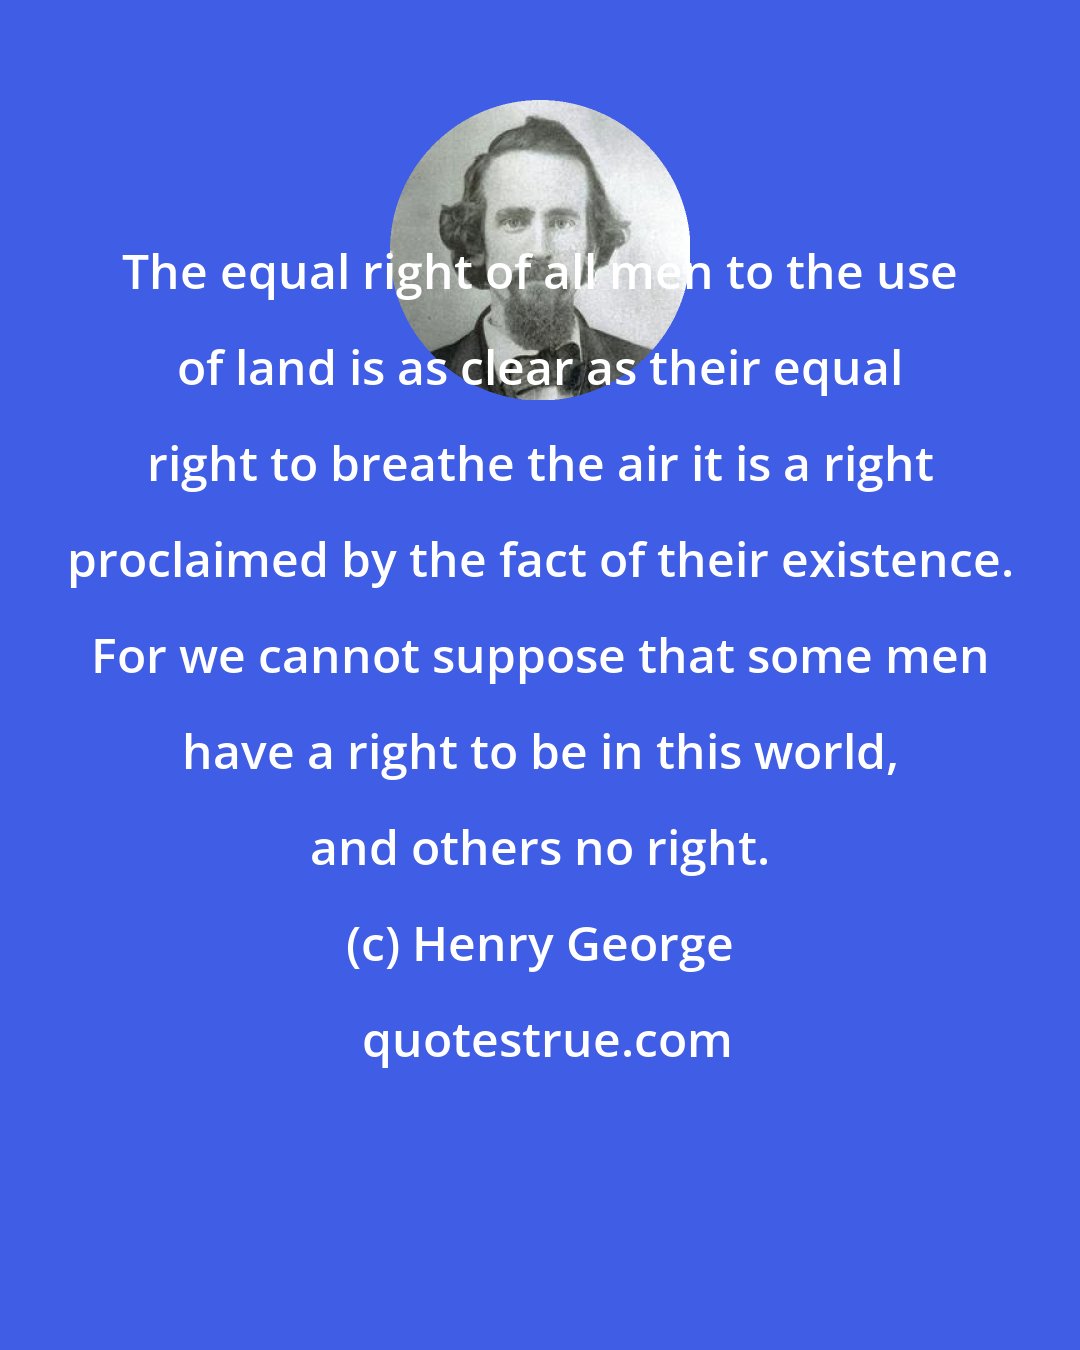 Henry George: The equal right of all men to the use of land is as clear as their equal right to breathe the air it is a right proclaimed by the fact of their existence. For we cannot suppose that some men have a right to be in this world, and others no right.